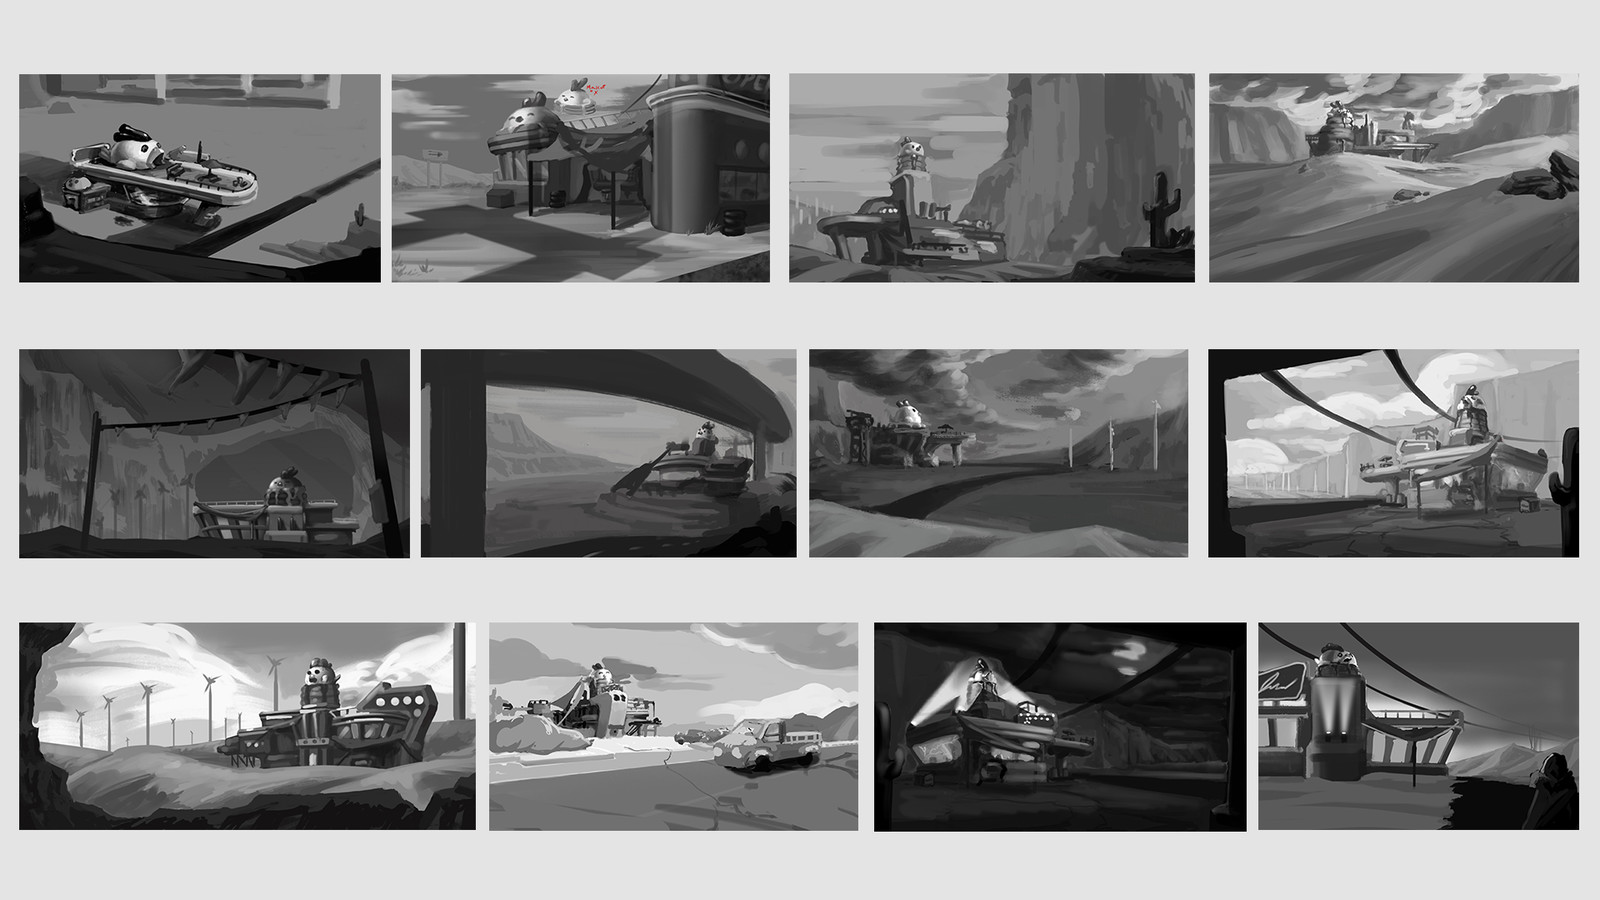 It was decided that designing the final look of the building should ultimately go hand in hand with designing the surroundings it was in, so i created several different desert settings and building variations, essentially beginning to flesh out the final.